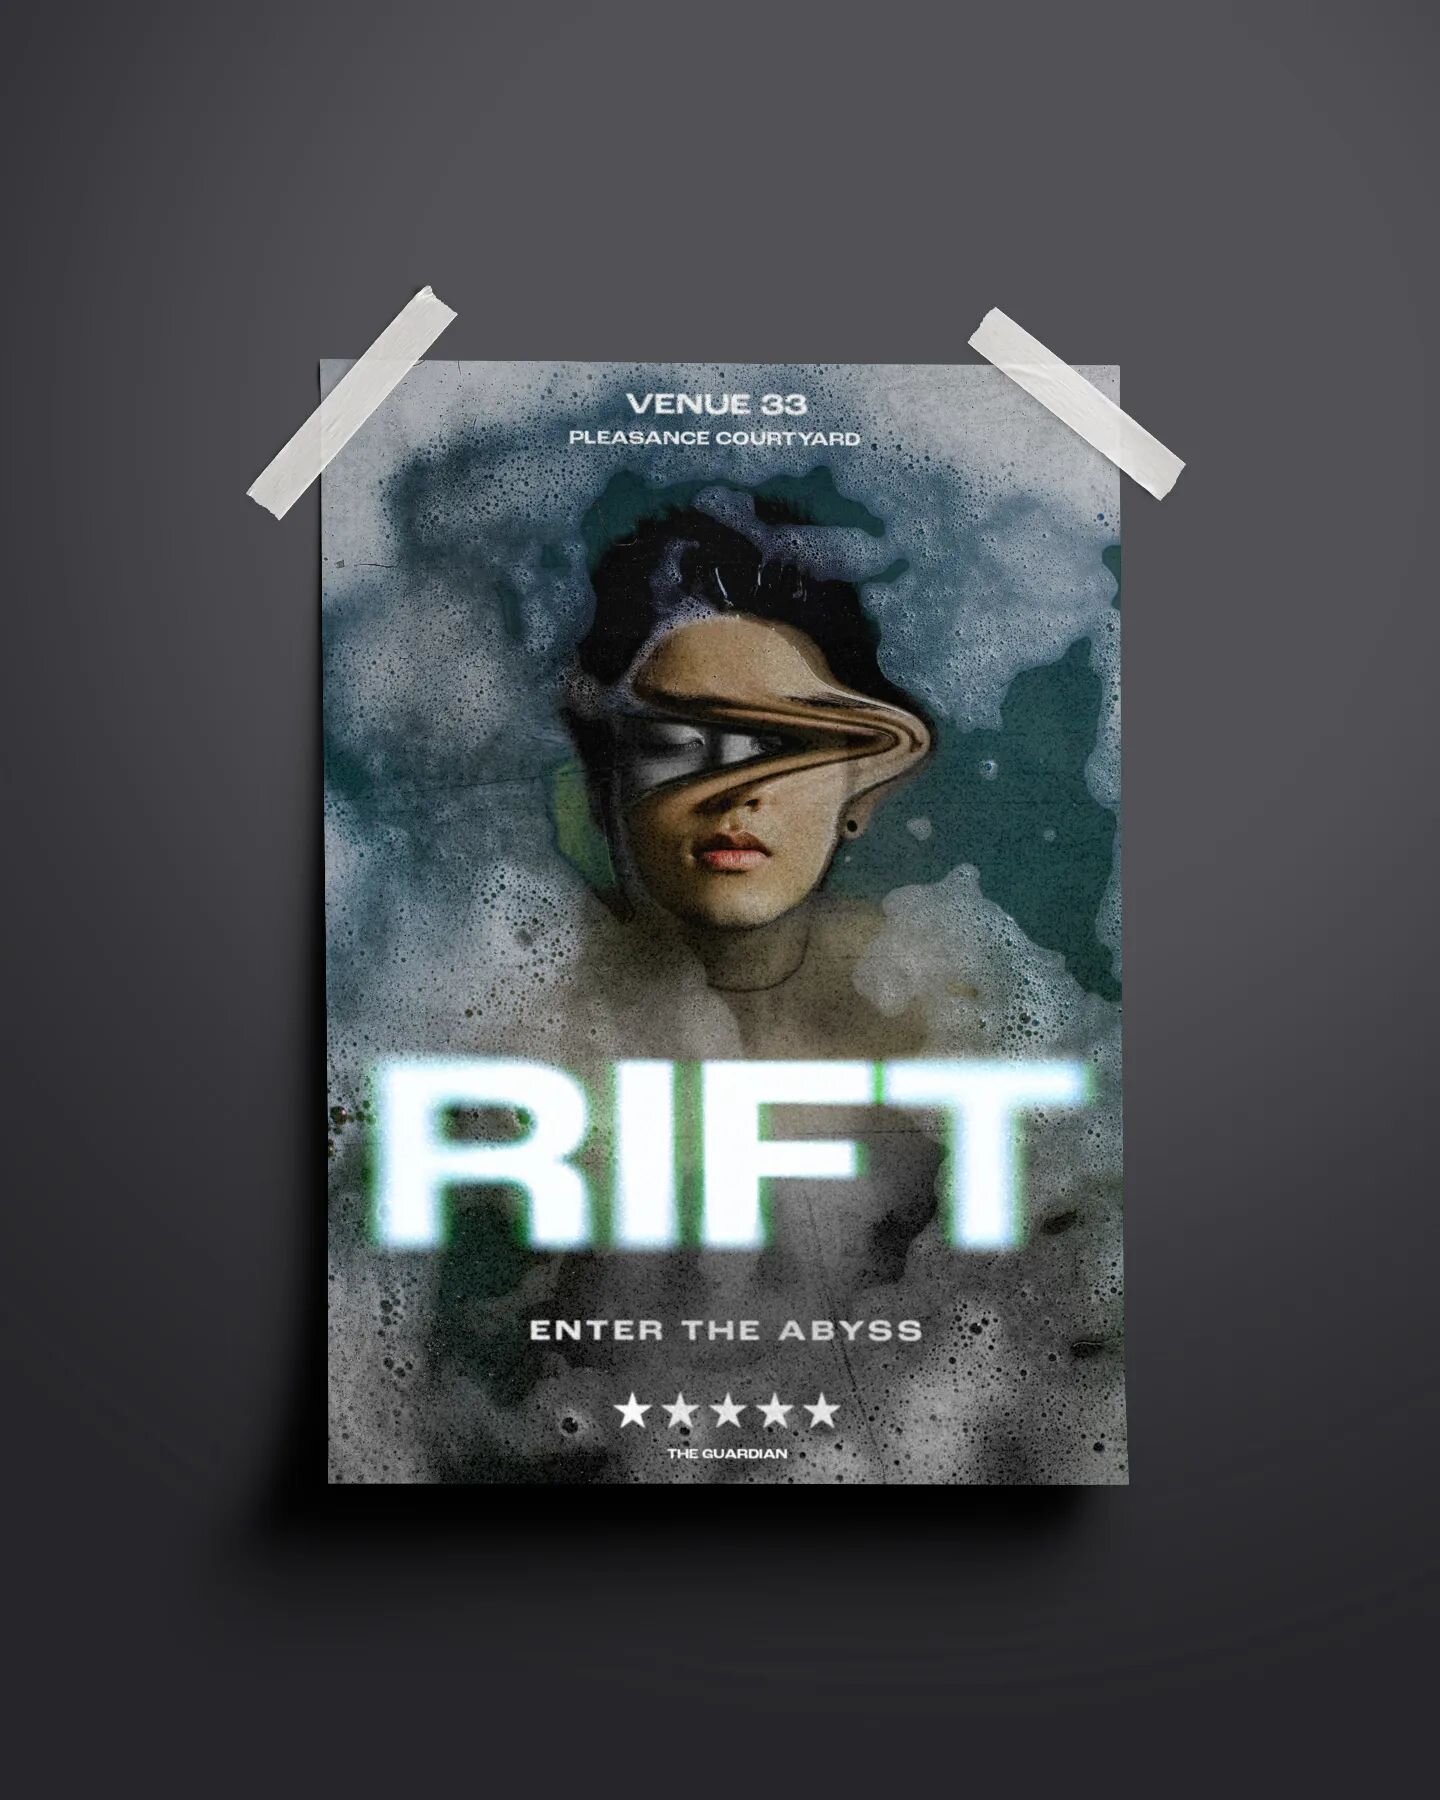 Some concept art for RIFT. 

It&rsquo;s been great to develop some abstract art recently - love jumping into Photoshop and seeing where it takes you 😊
&bull;
&bull;
&bull;
#PosterArt #DesignSkills #PhotographyMagic #FringeShow #CreativeVisuals #Uniq